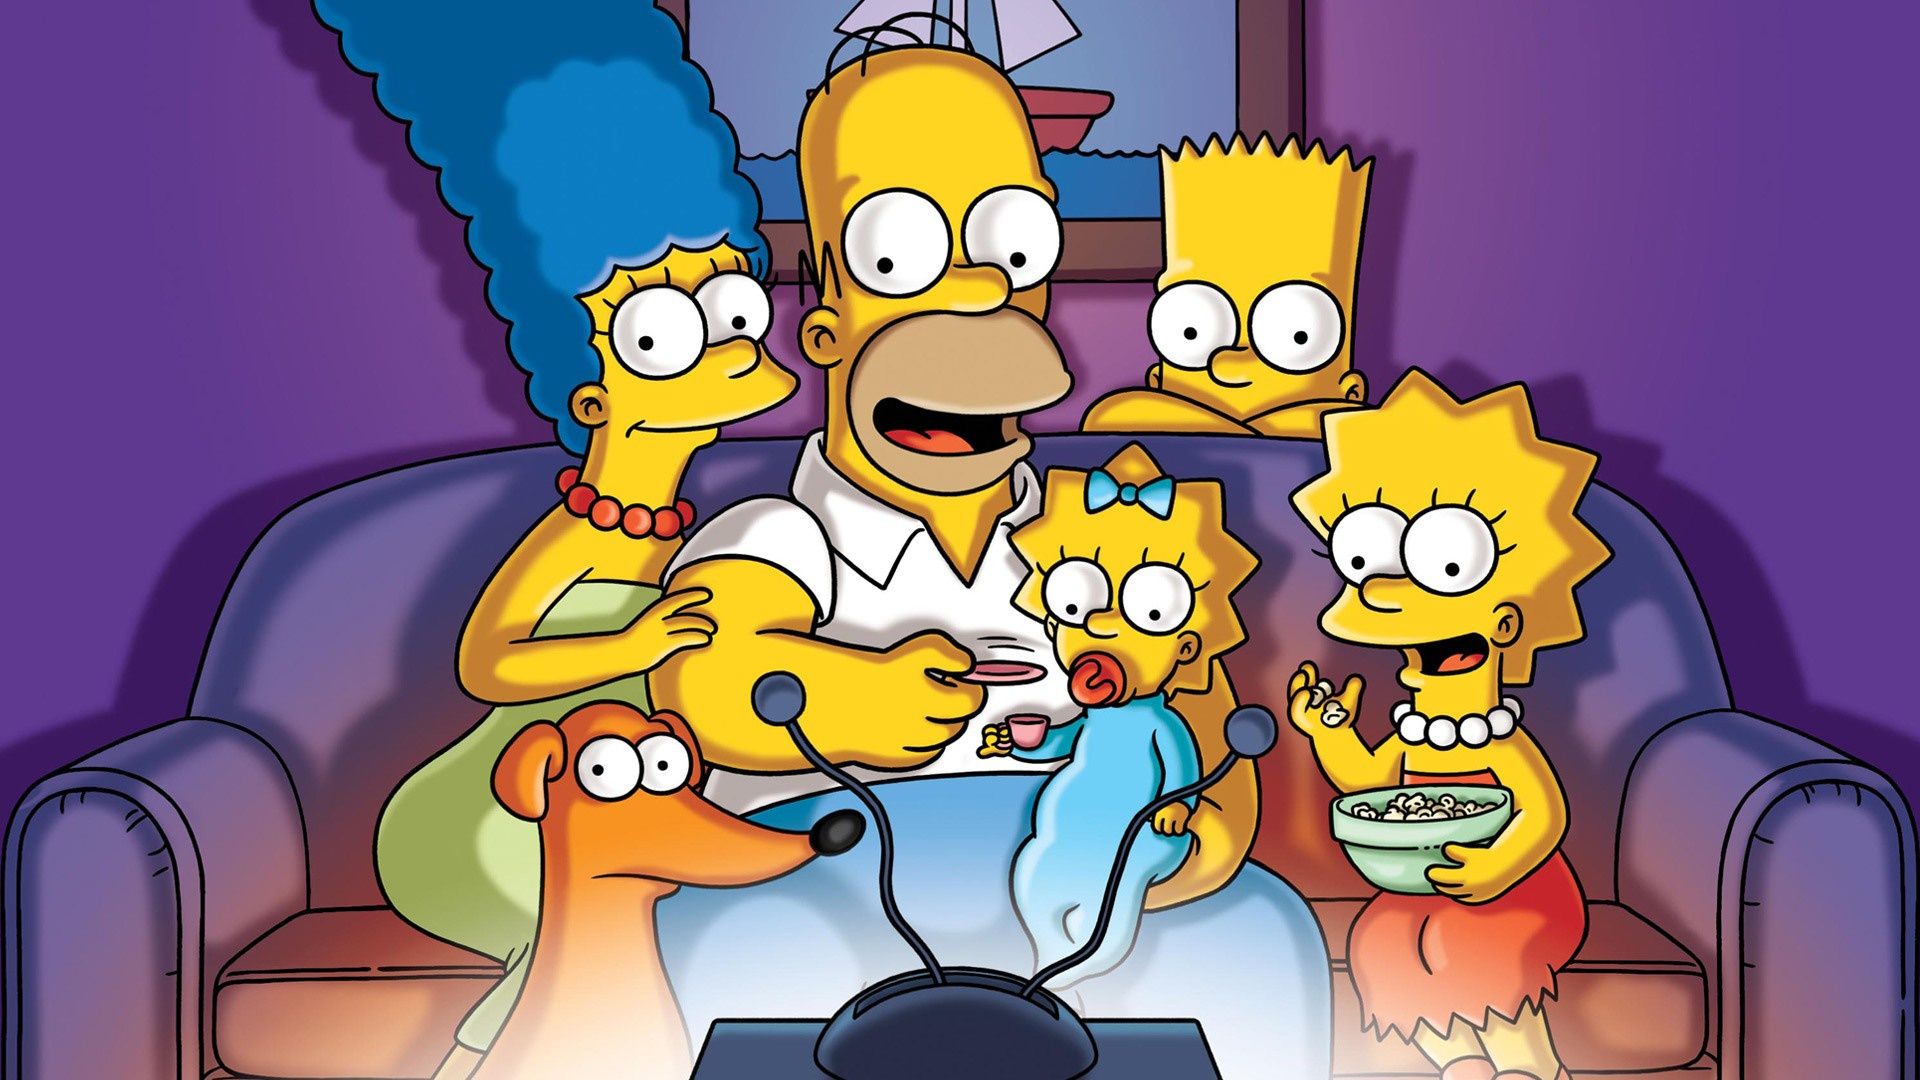 The simpsons are sitting on a couch watching tv - Lisa Simpson